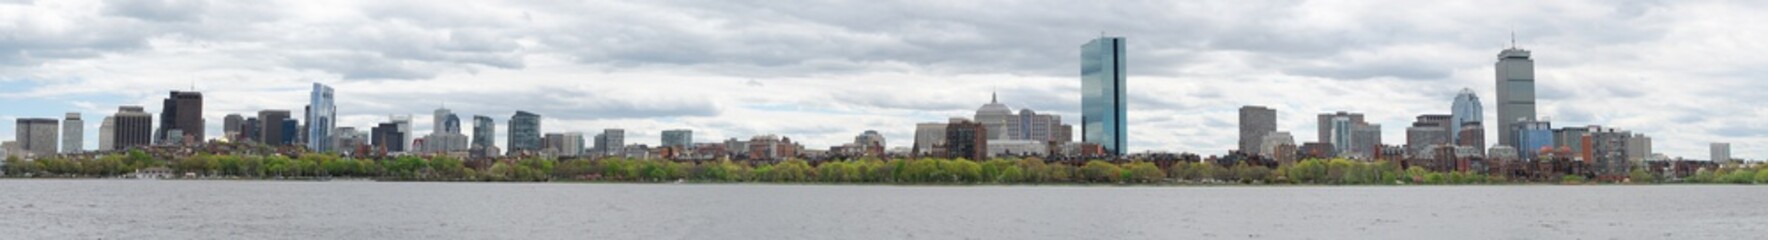 panorama view of Boston skyline in spring season from Charles river